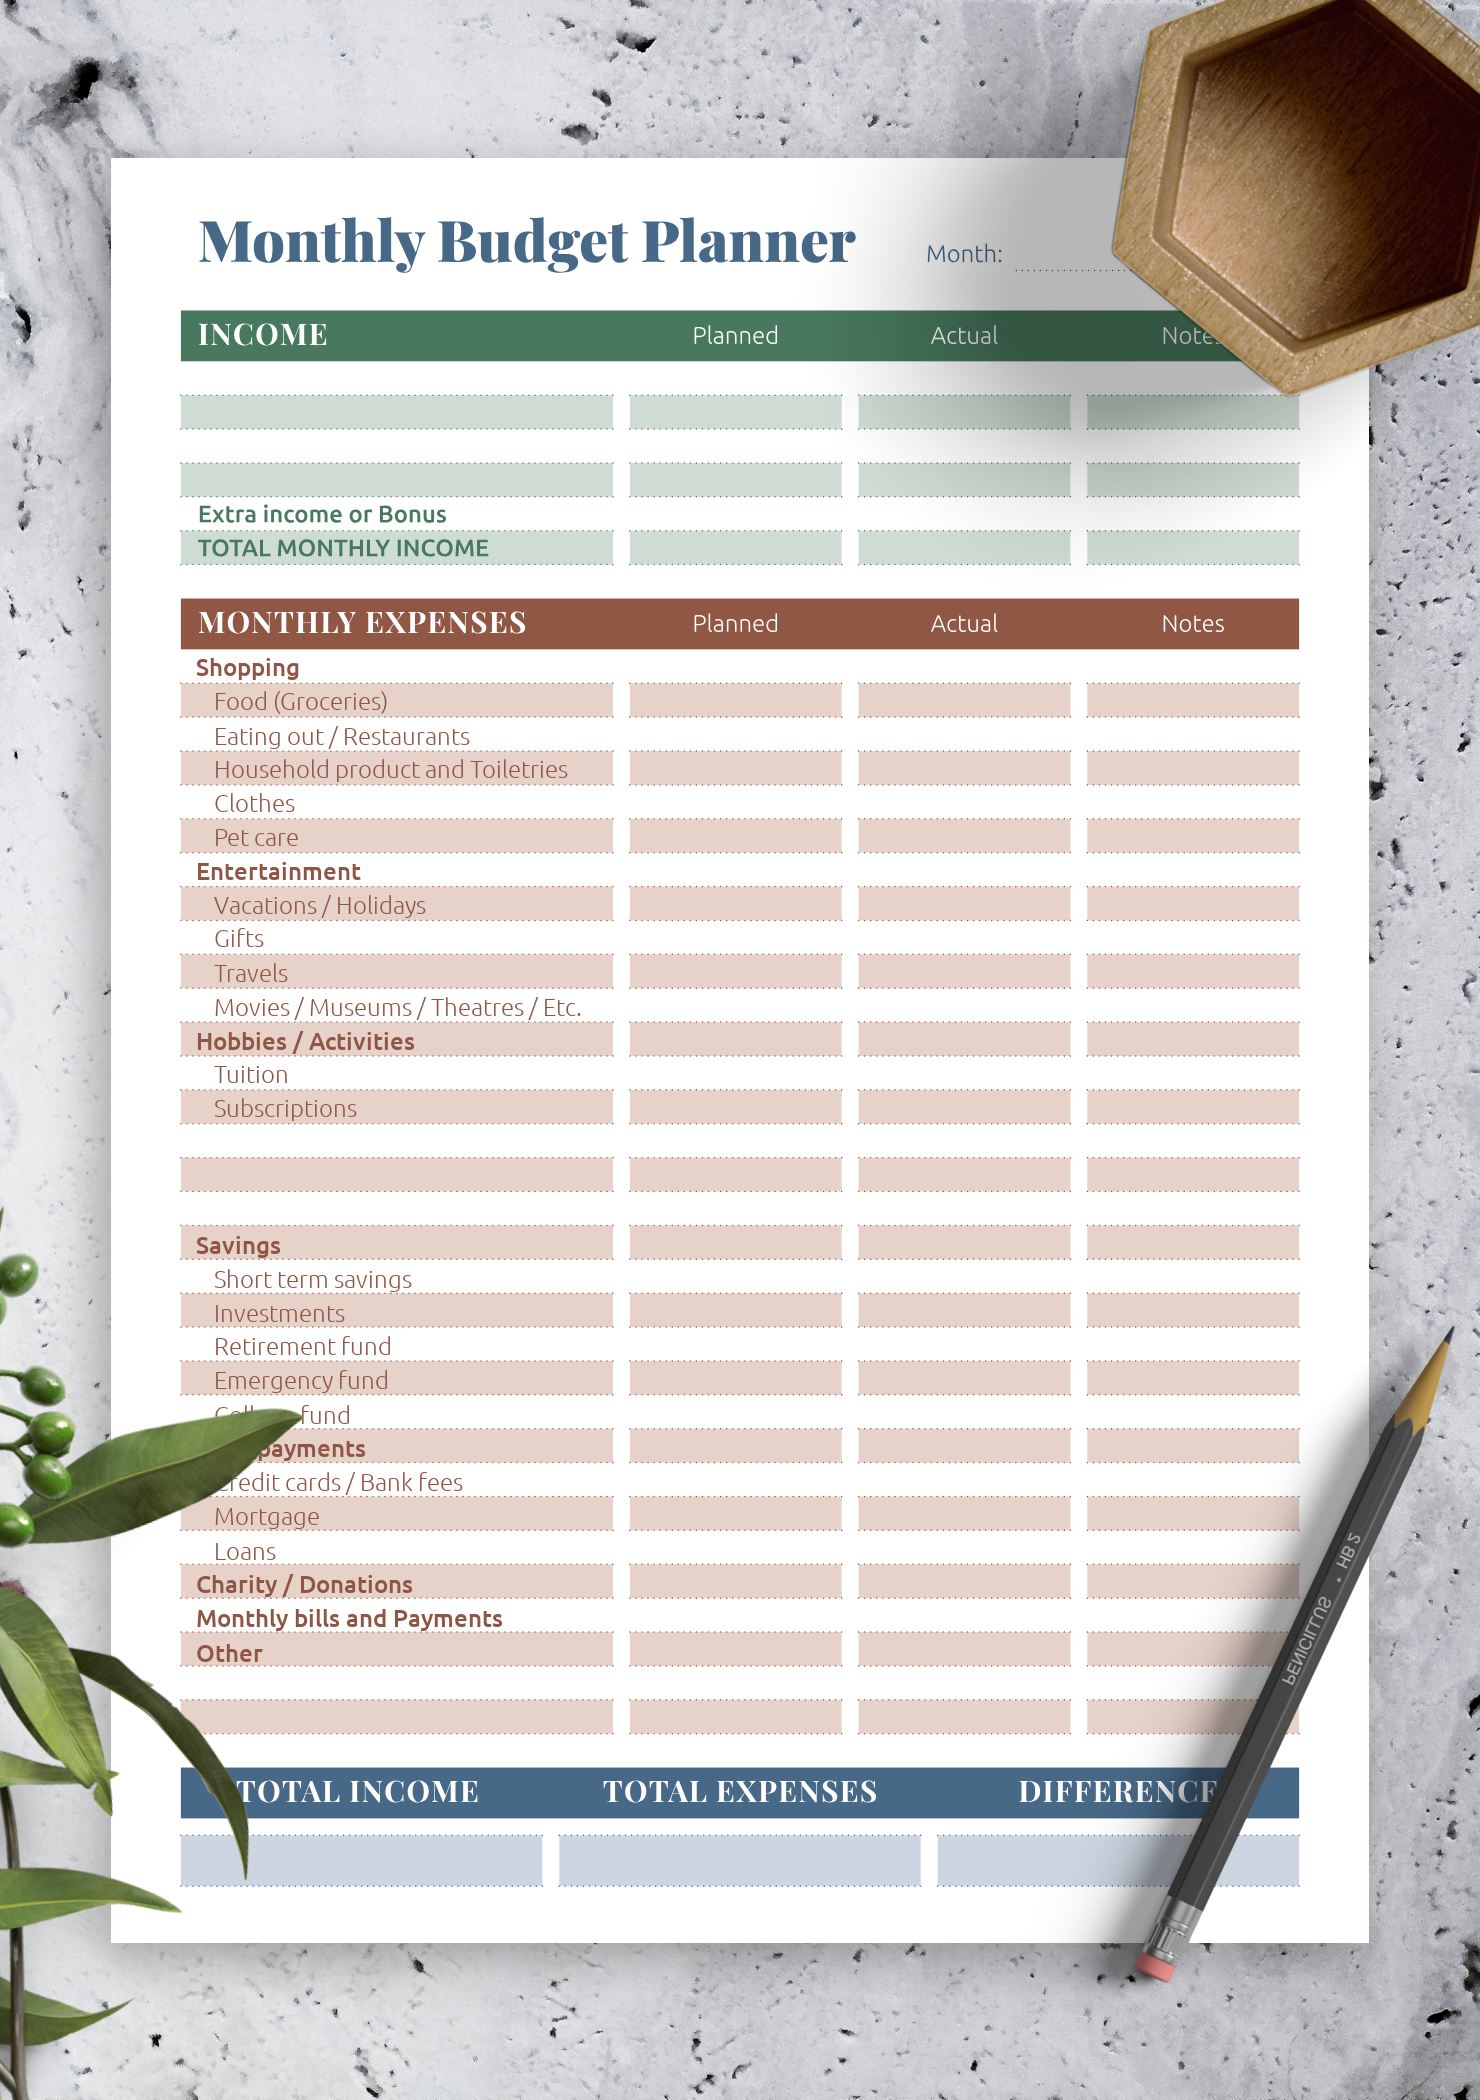 Planning form for Bamboo. Budget planning